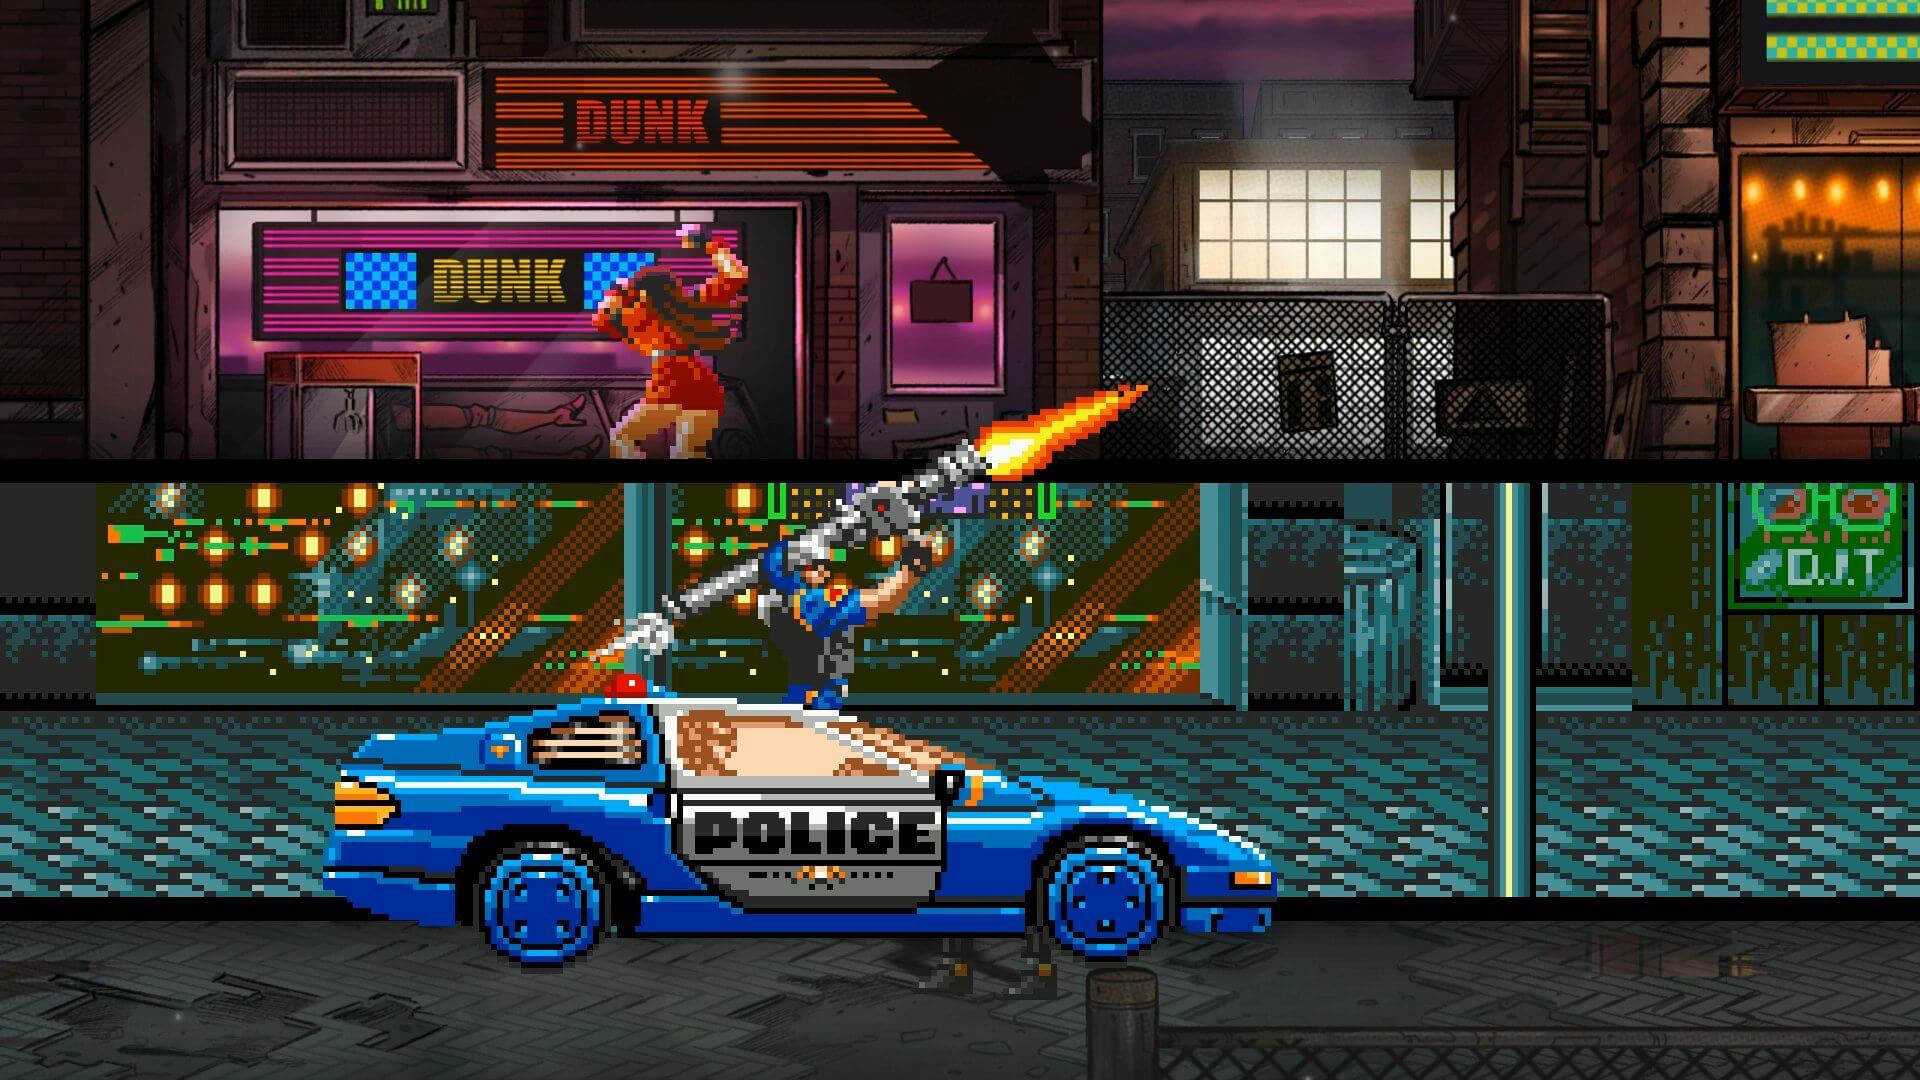 http://www.cosmocover.com/wp-content/uploads/2020/04/StreetsOfRage4-0028.jpg